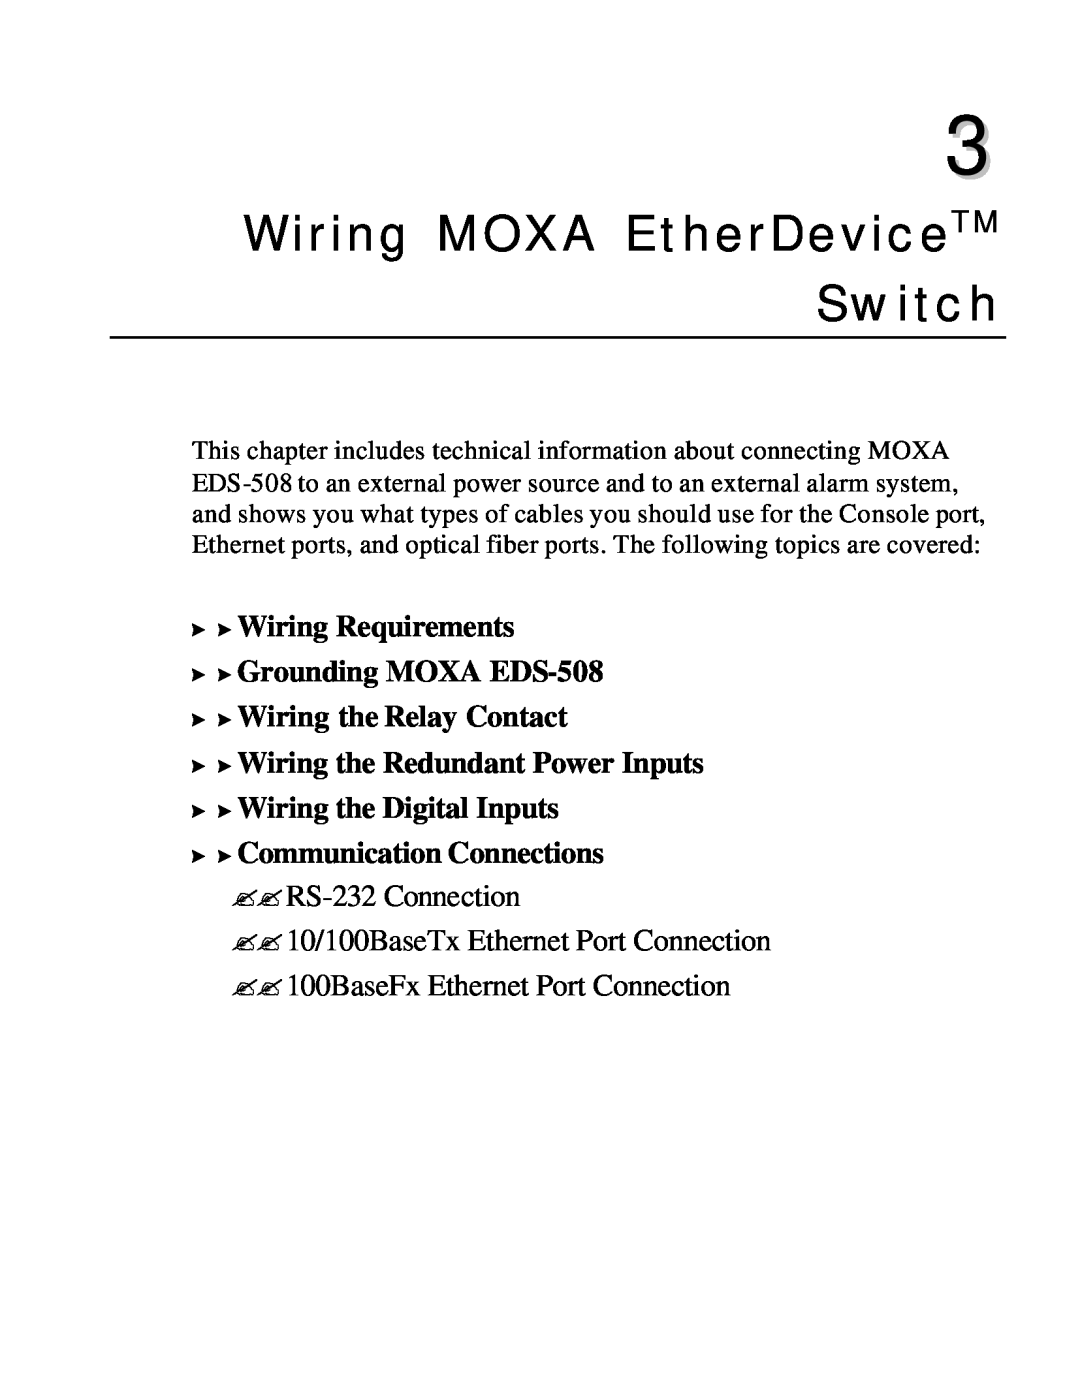 Moxa Technologies manual Wiring MOXA EtherDeviceTM Switch, ? ? Wiring Requirements ? ? Grounding MOXA EDS-508 